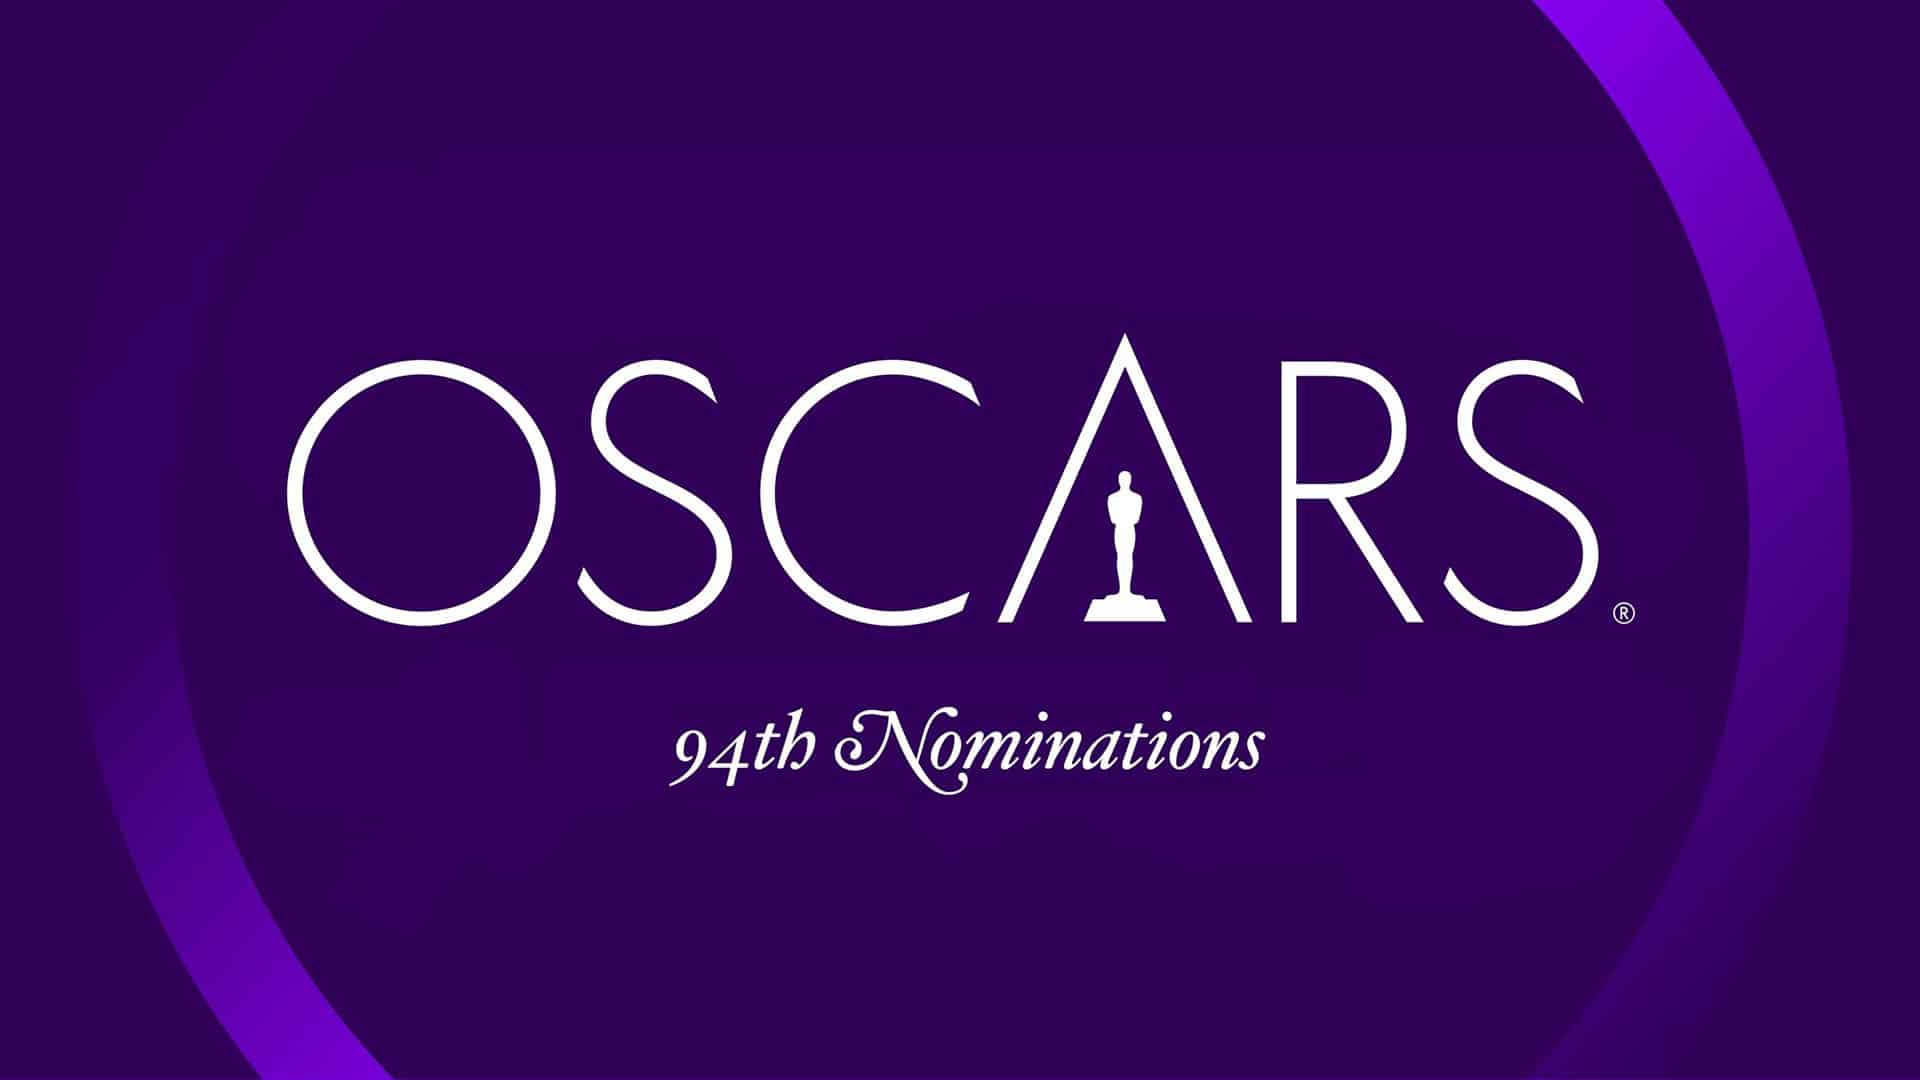 Oscars 2022 Nominations Announced Here's the full list of Nominees